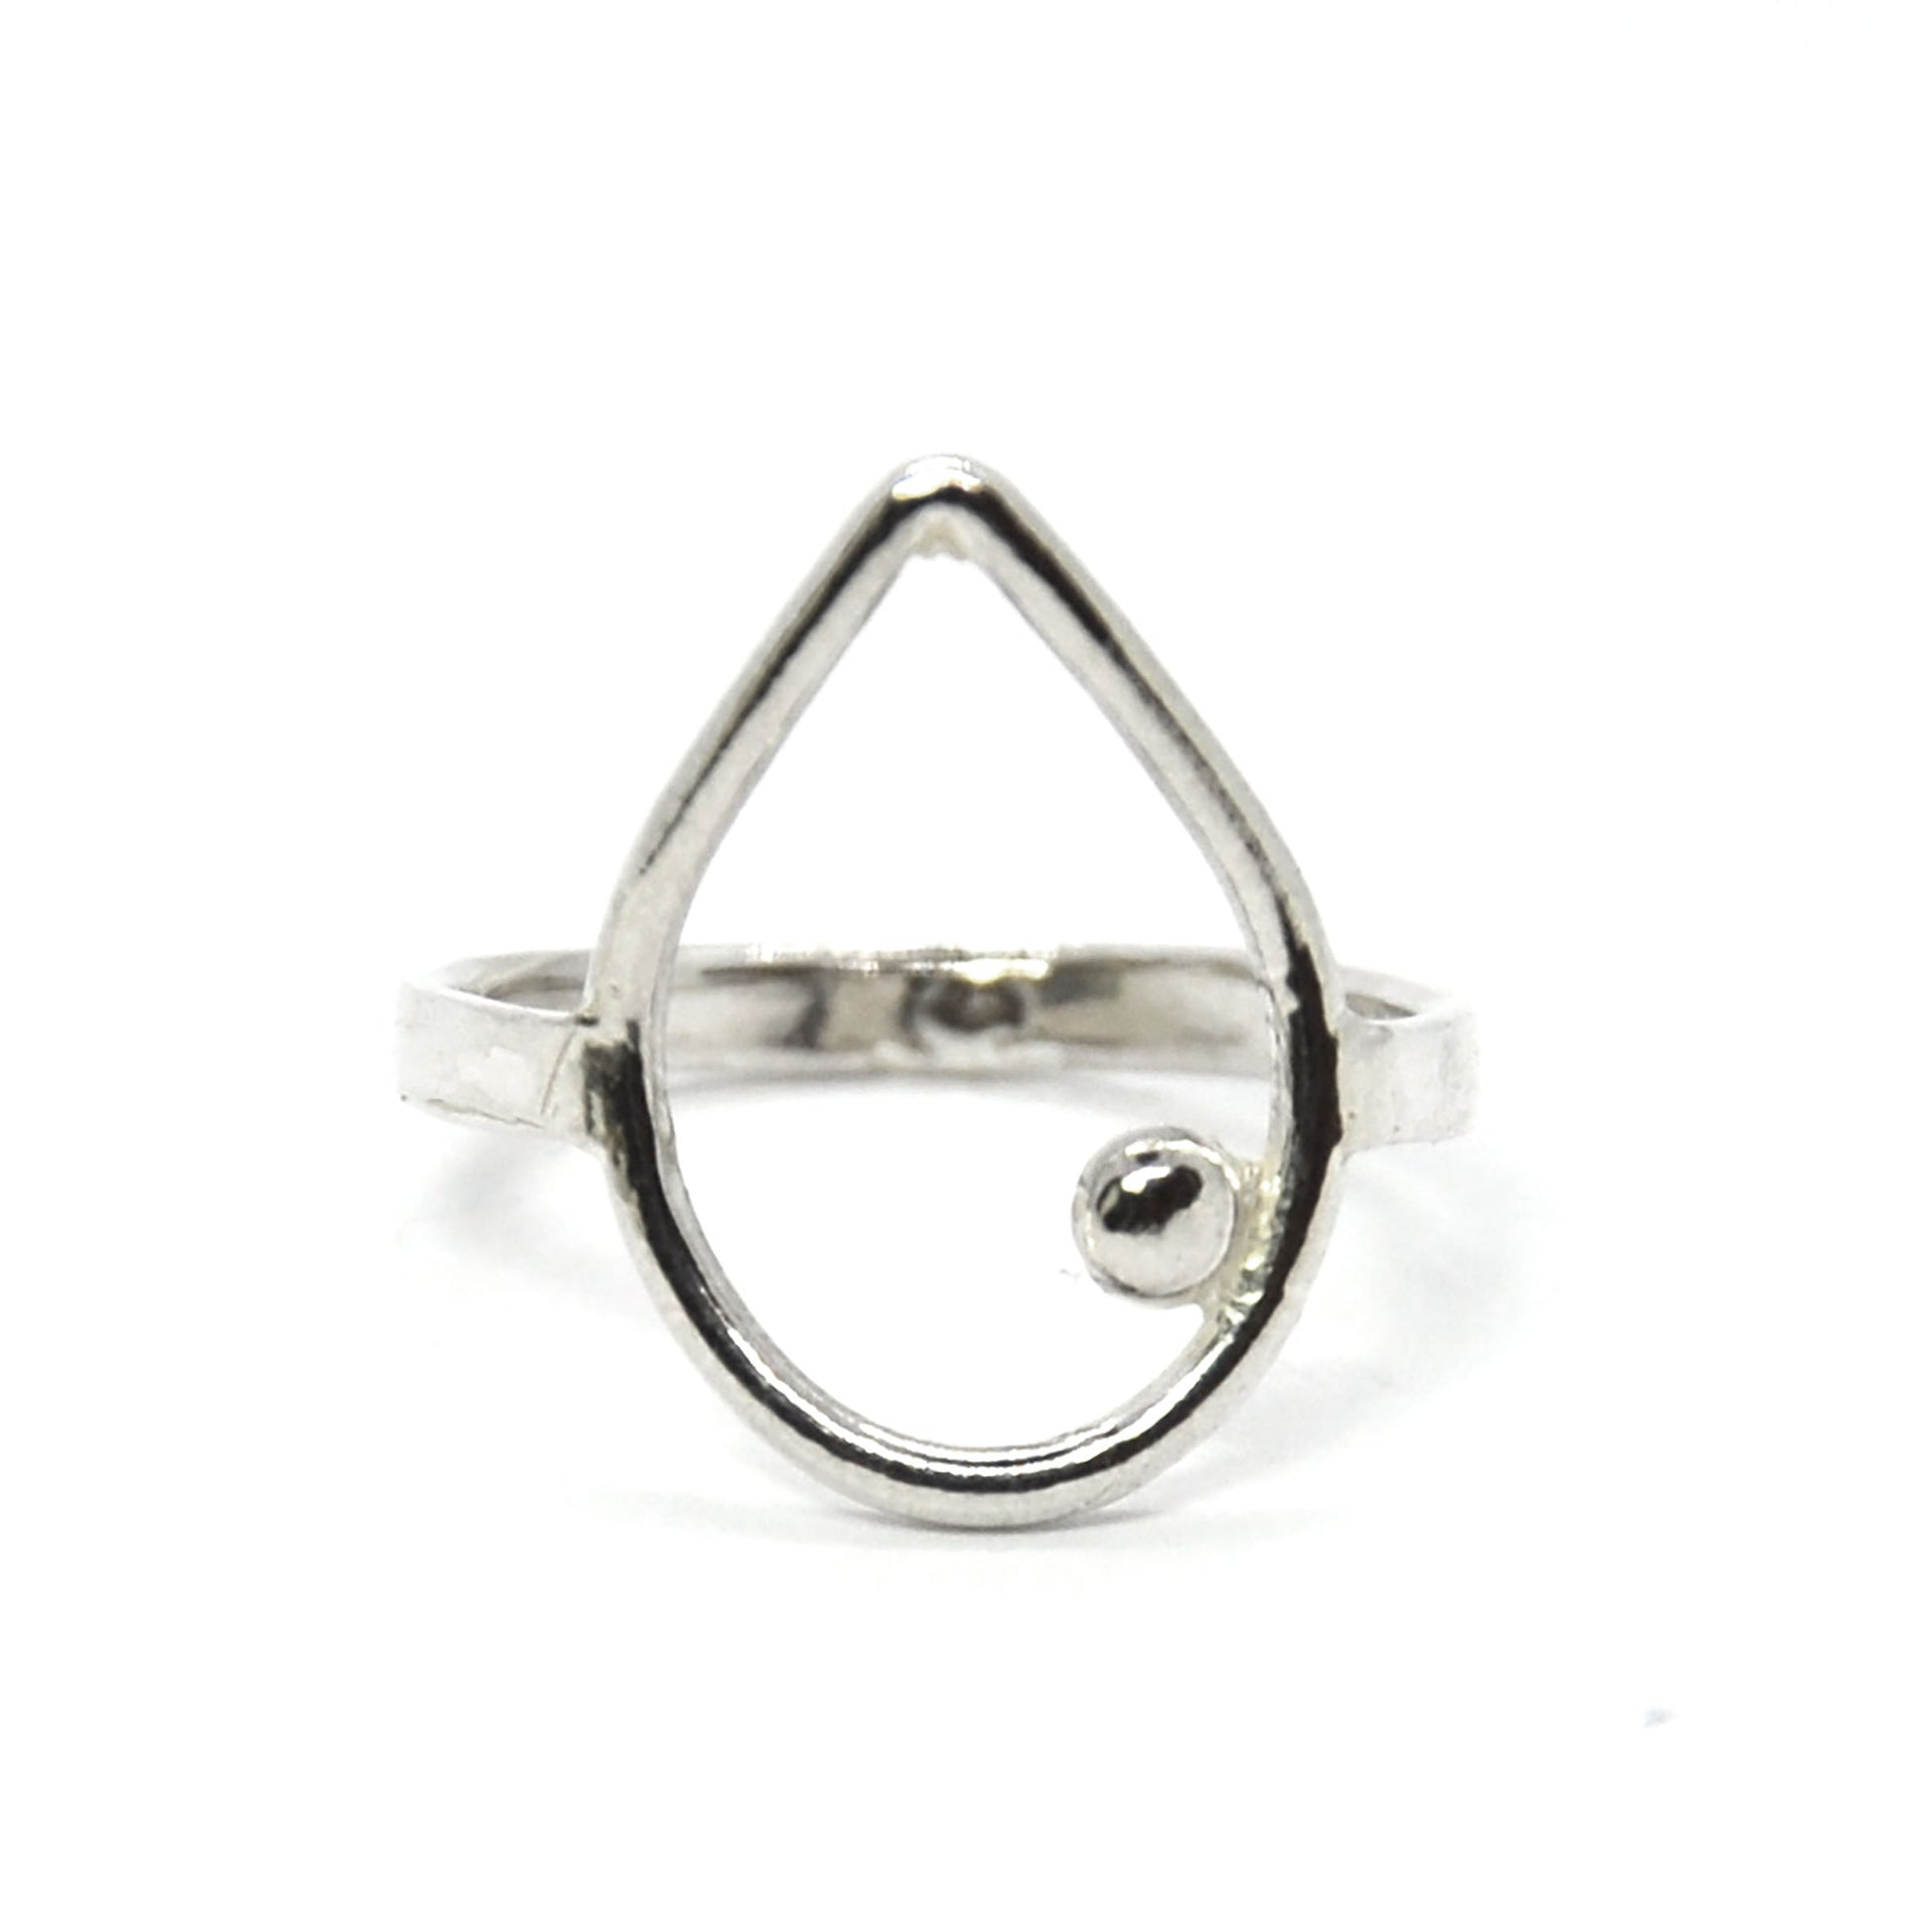 Silver open teardrop shaped ring with off-centre ball.